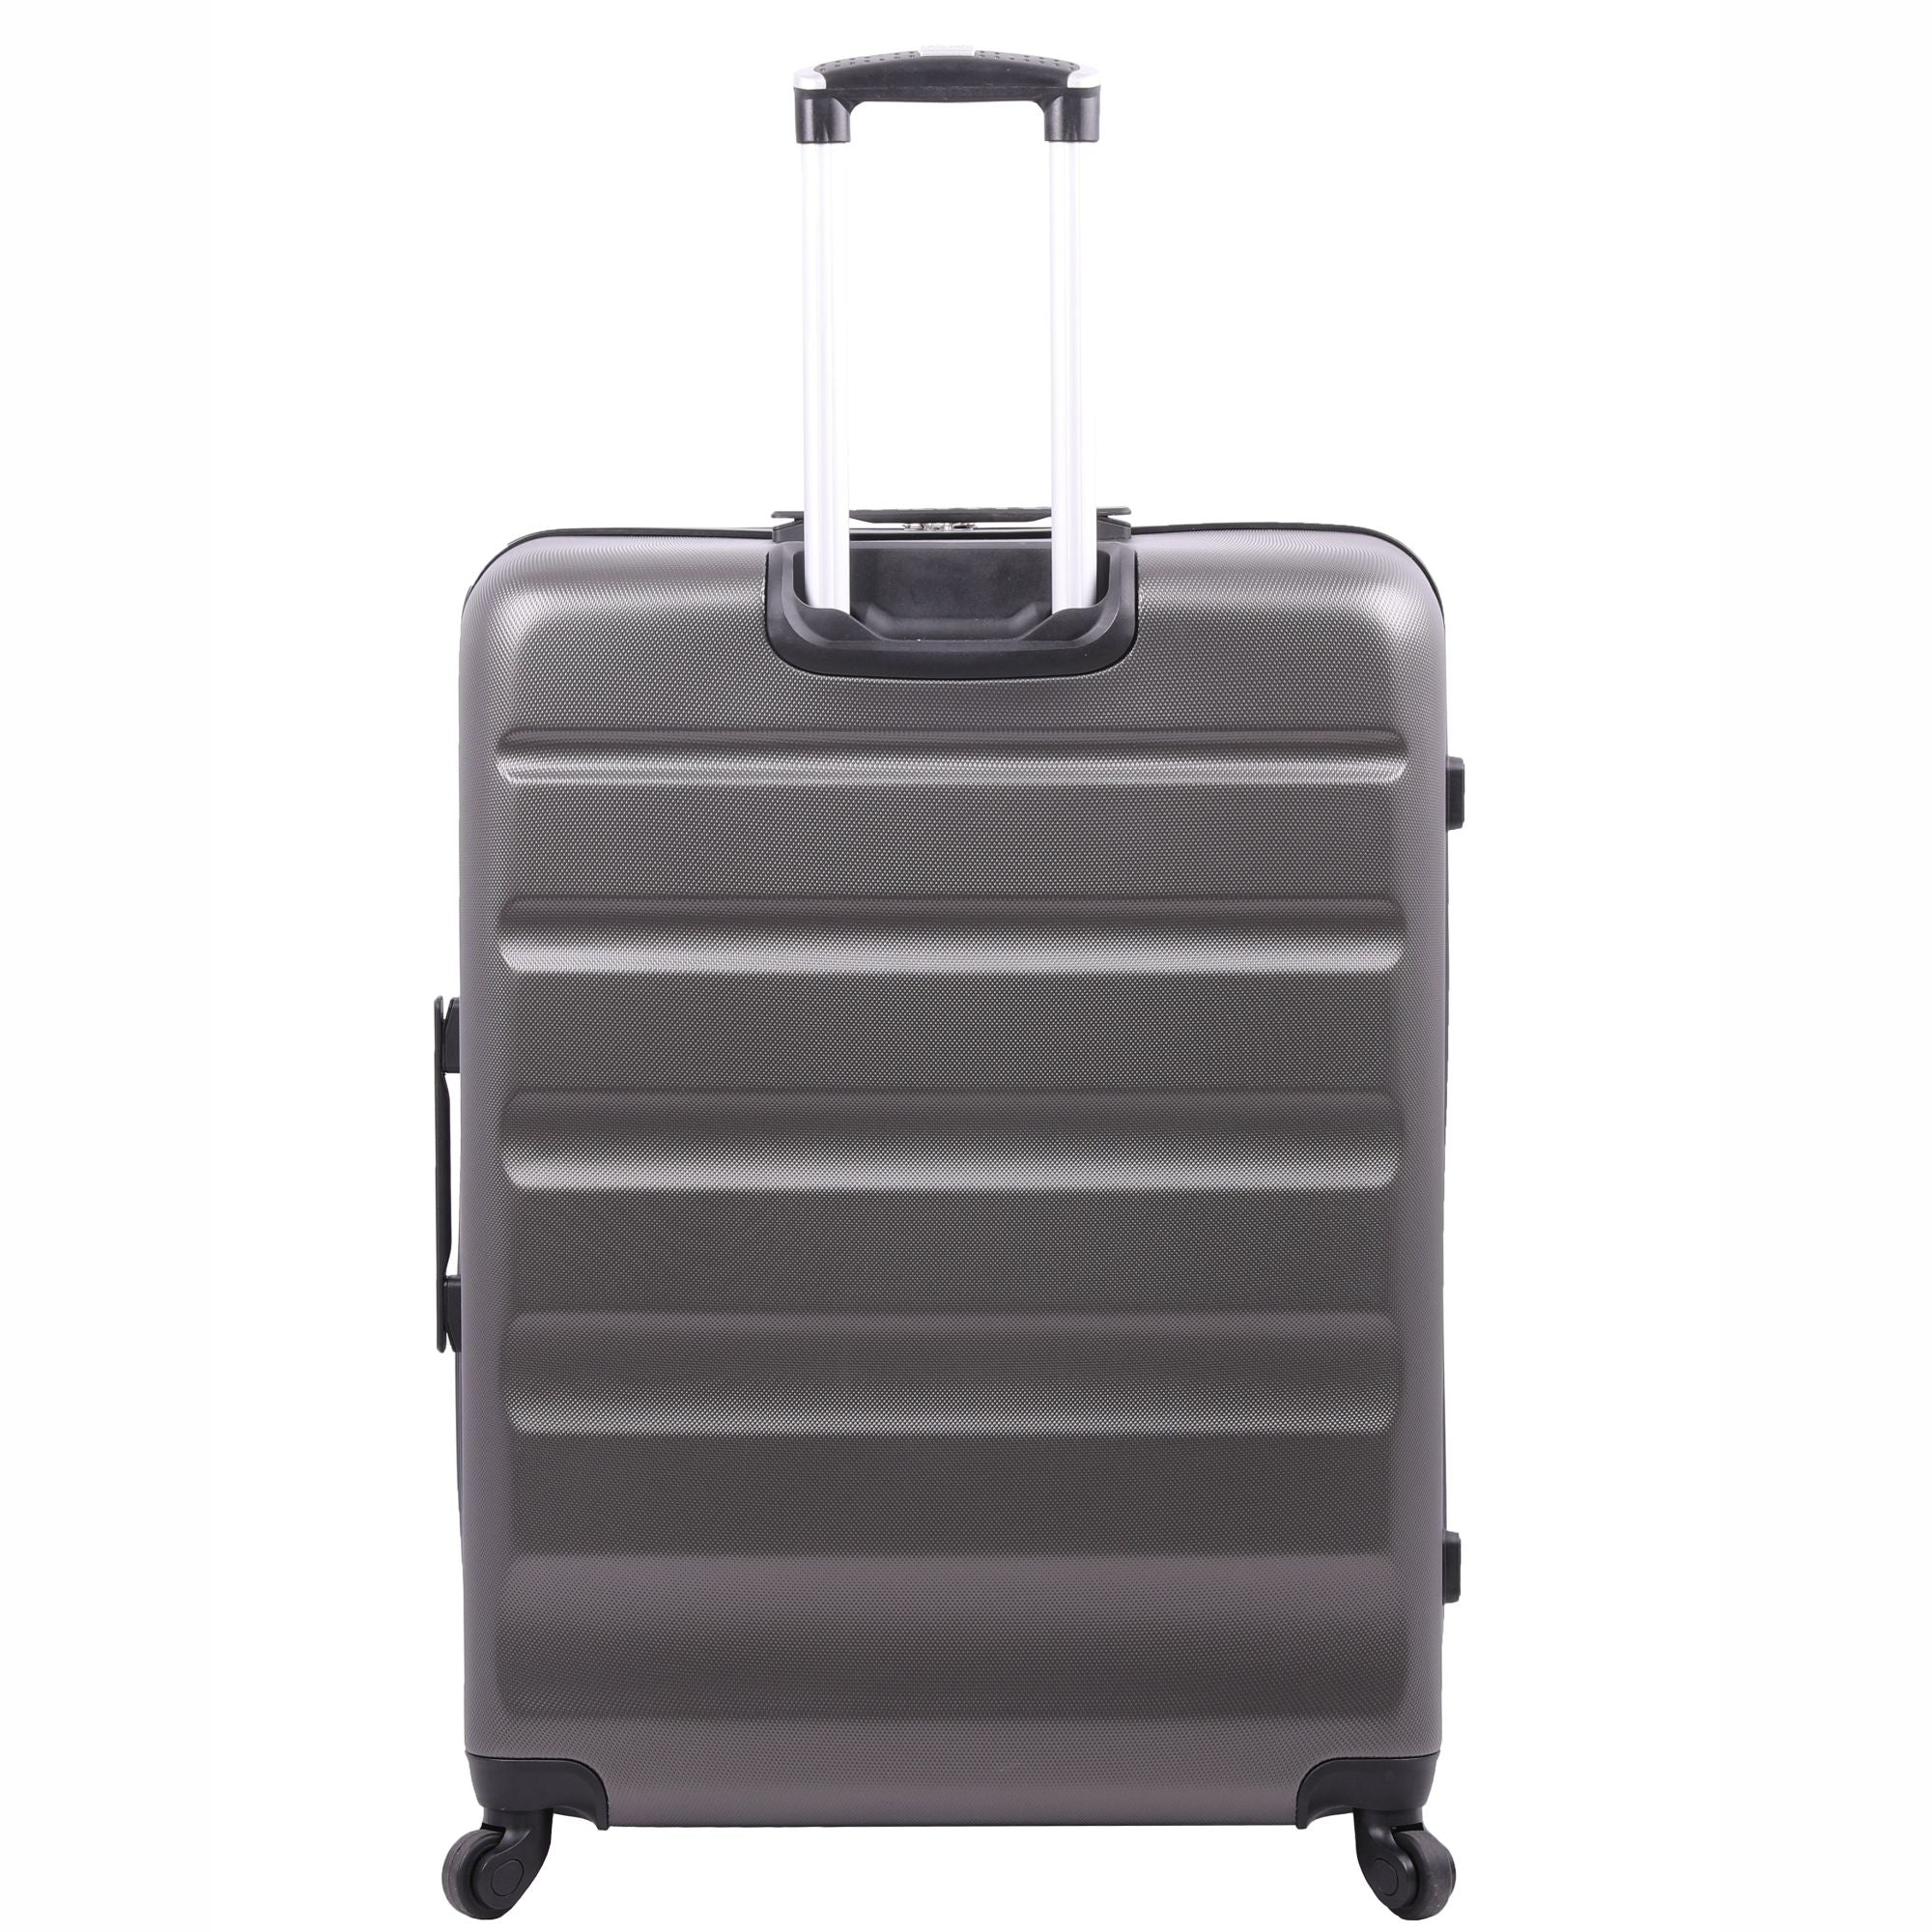 Aerolite Ryanair Ultimate Luggage Set, Priority Cabin Suitcase 55x40x20cm, Underseat Holdall 40x20x25cm, 29” Large Checked Suitcase, Luggage Scale and 2xTSA locks